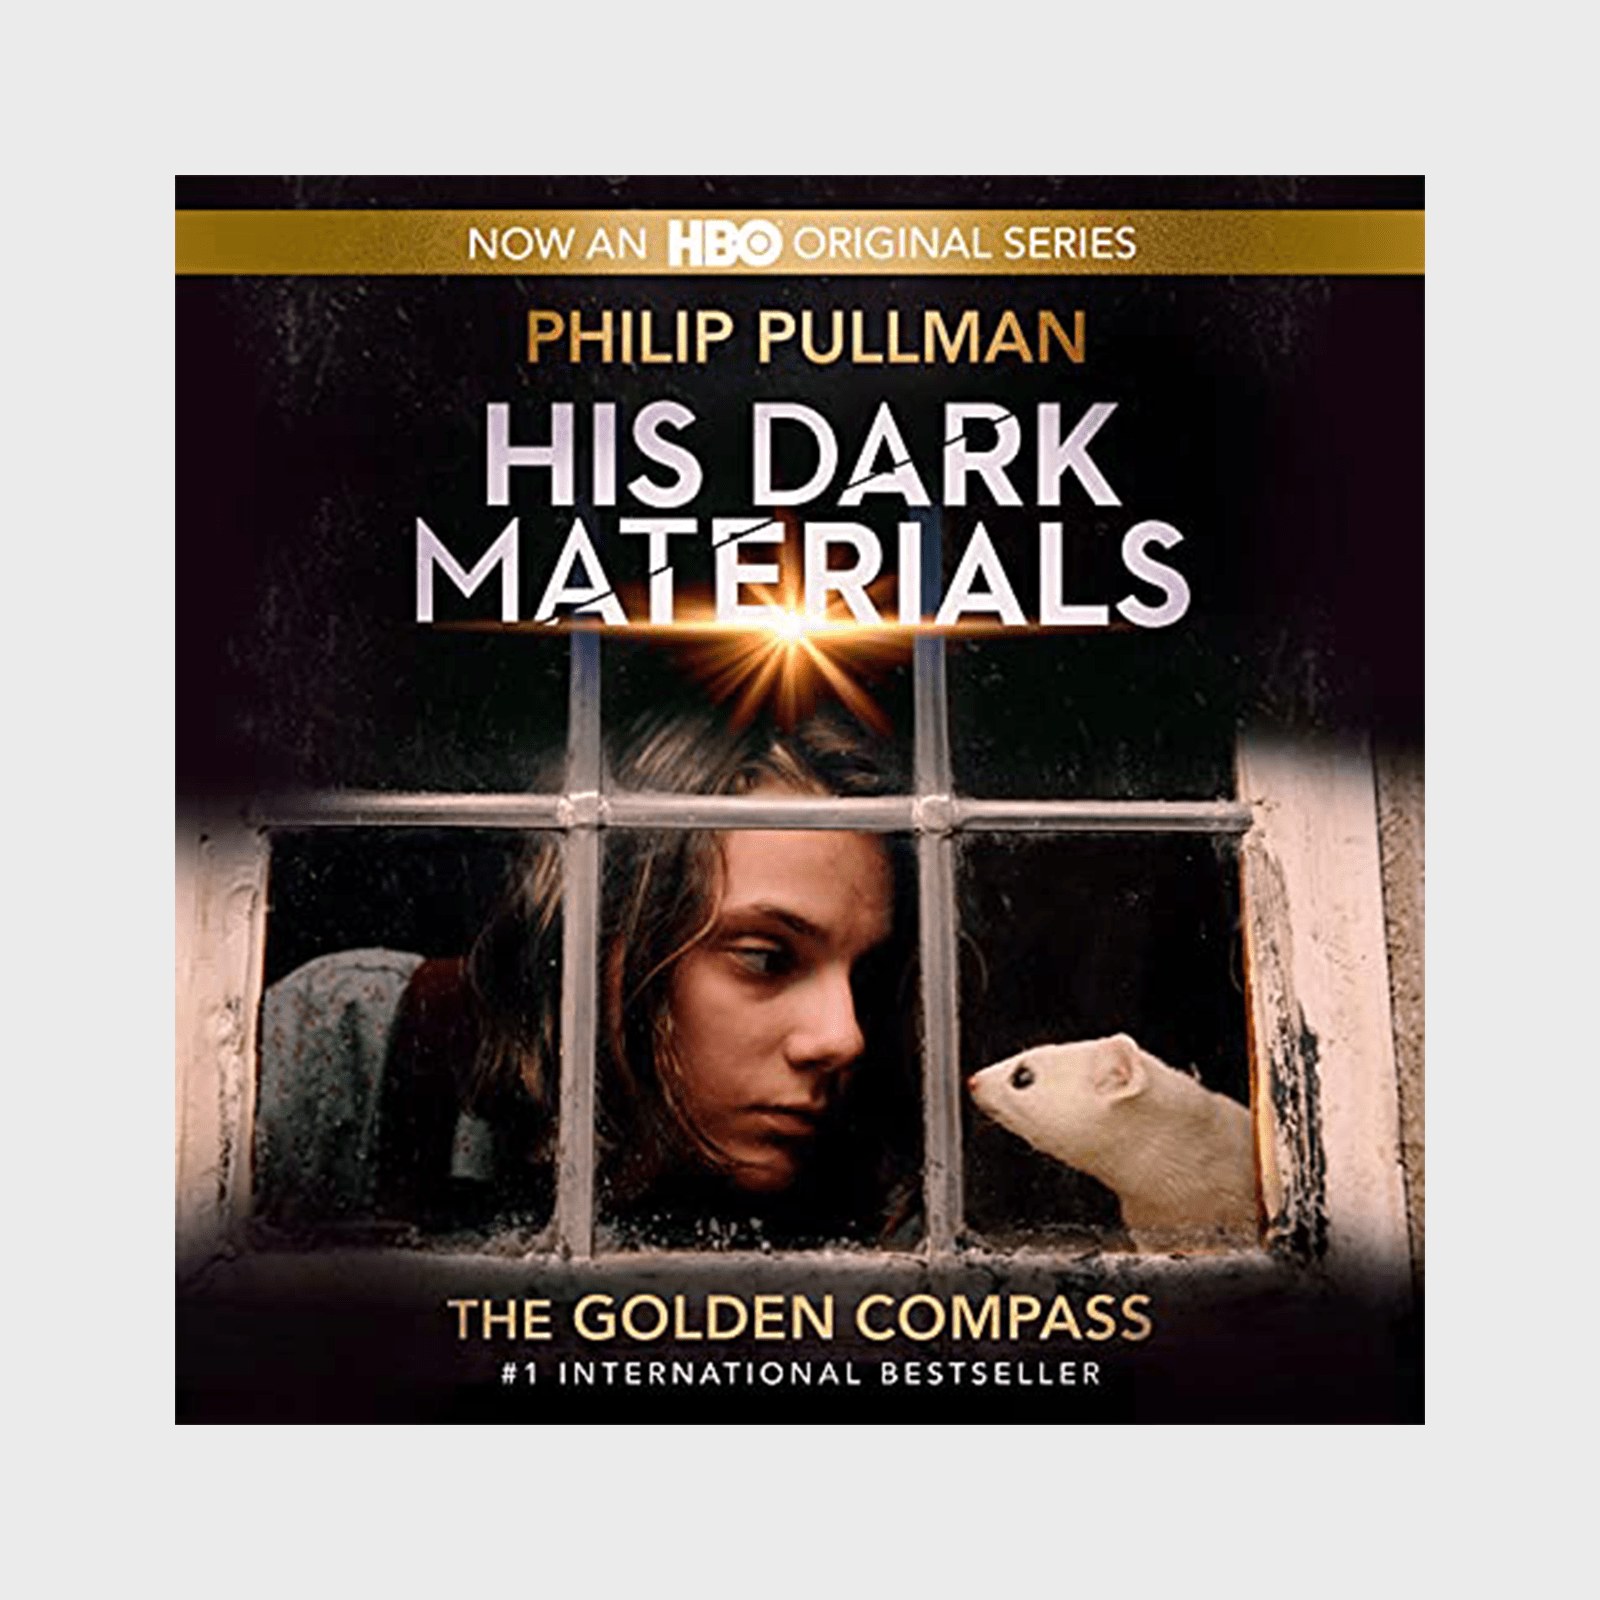 <h3><em>The Golden Compass: His Dark Materials </em>by Philip Pullman</h3> <p>If you picked up these considerably sized fantasy <a href="https://www.rd.com/list/best-books-for-teens/" rel="noopener noreferrer">young adult novels</a>—<a href="https://www.amazon.com/Golden-Compass-Dark-Materials-Book/dp/B0000W6SPE/" rel="noopener noreferrer"><em>The Golden Compass</em></a> and its two sequels—in high school, maybe it's time to do so again, or listen with your own teens. The author is the narrator, with every character played by a different actor, making the audiobook "like watching a movie in your head," says one user. And that's saying something, considering the books were also turned into an HBO series with James McAvoy and Lin-Manuel Miranda.</p> <p class="listicle-page__cta-button-shop"><a class="shop-btn" href="https://www.amazon.com/Golden-Compass-Dark-Materials-Book/dp/B0000W6SPE/">Shop Now</a></p>